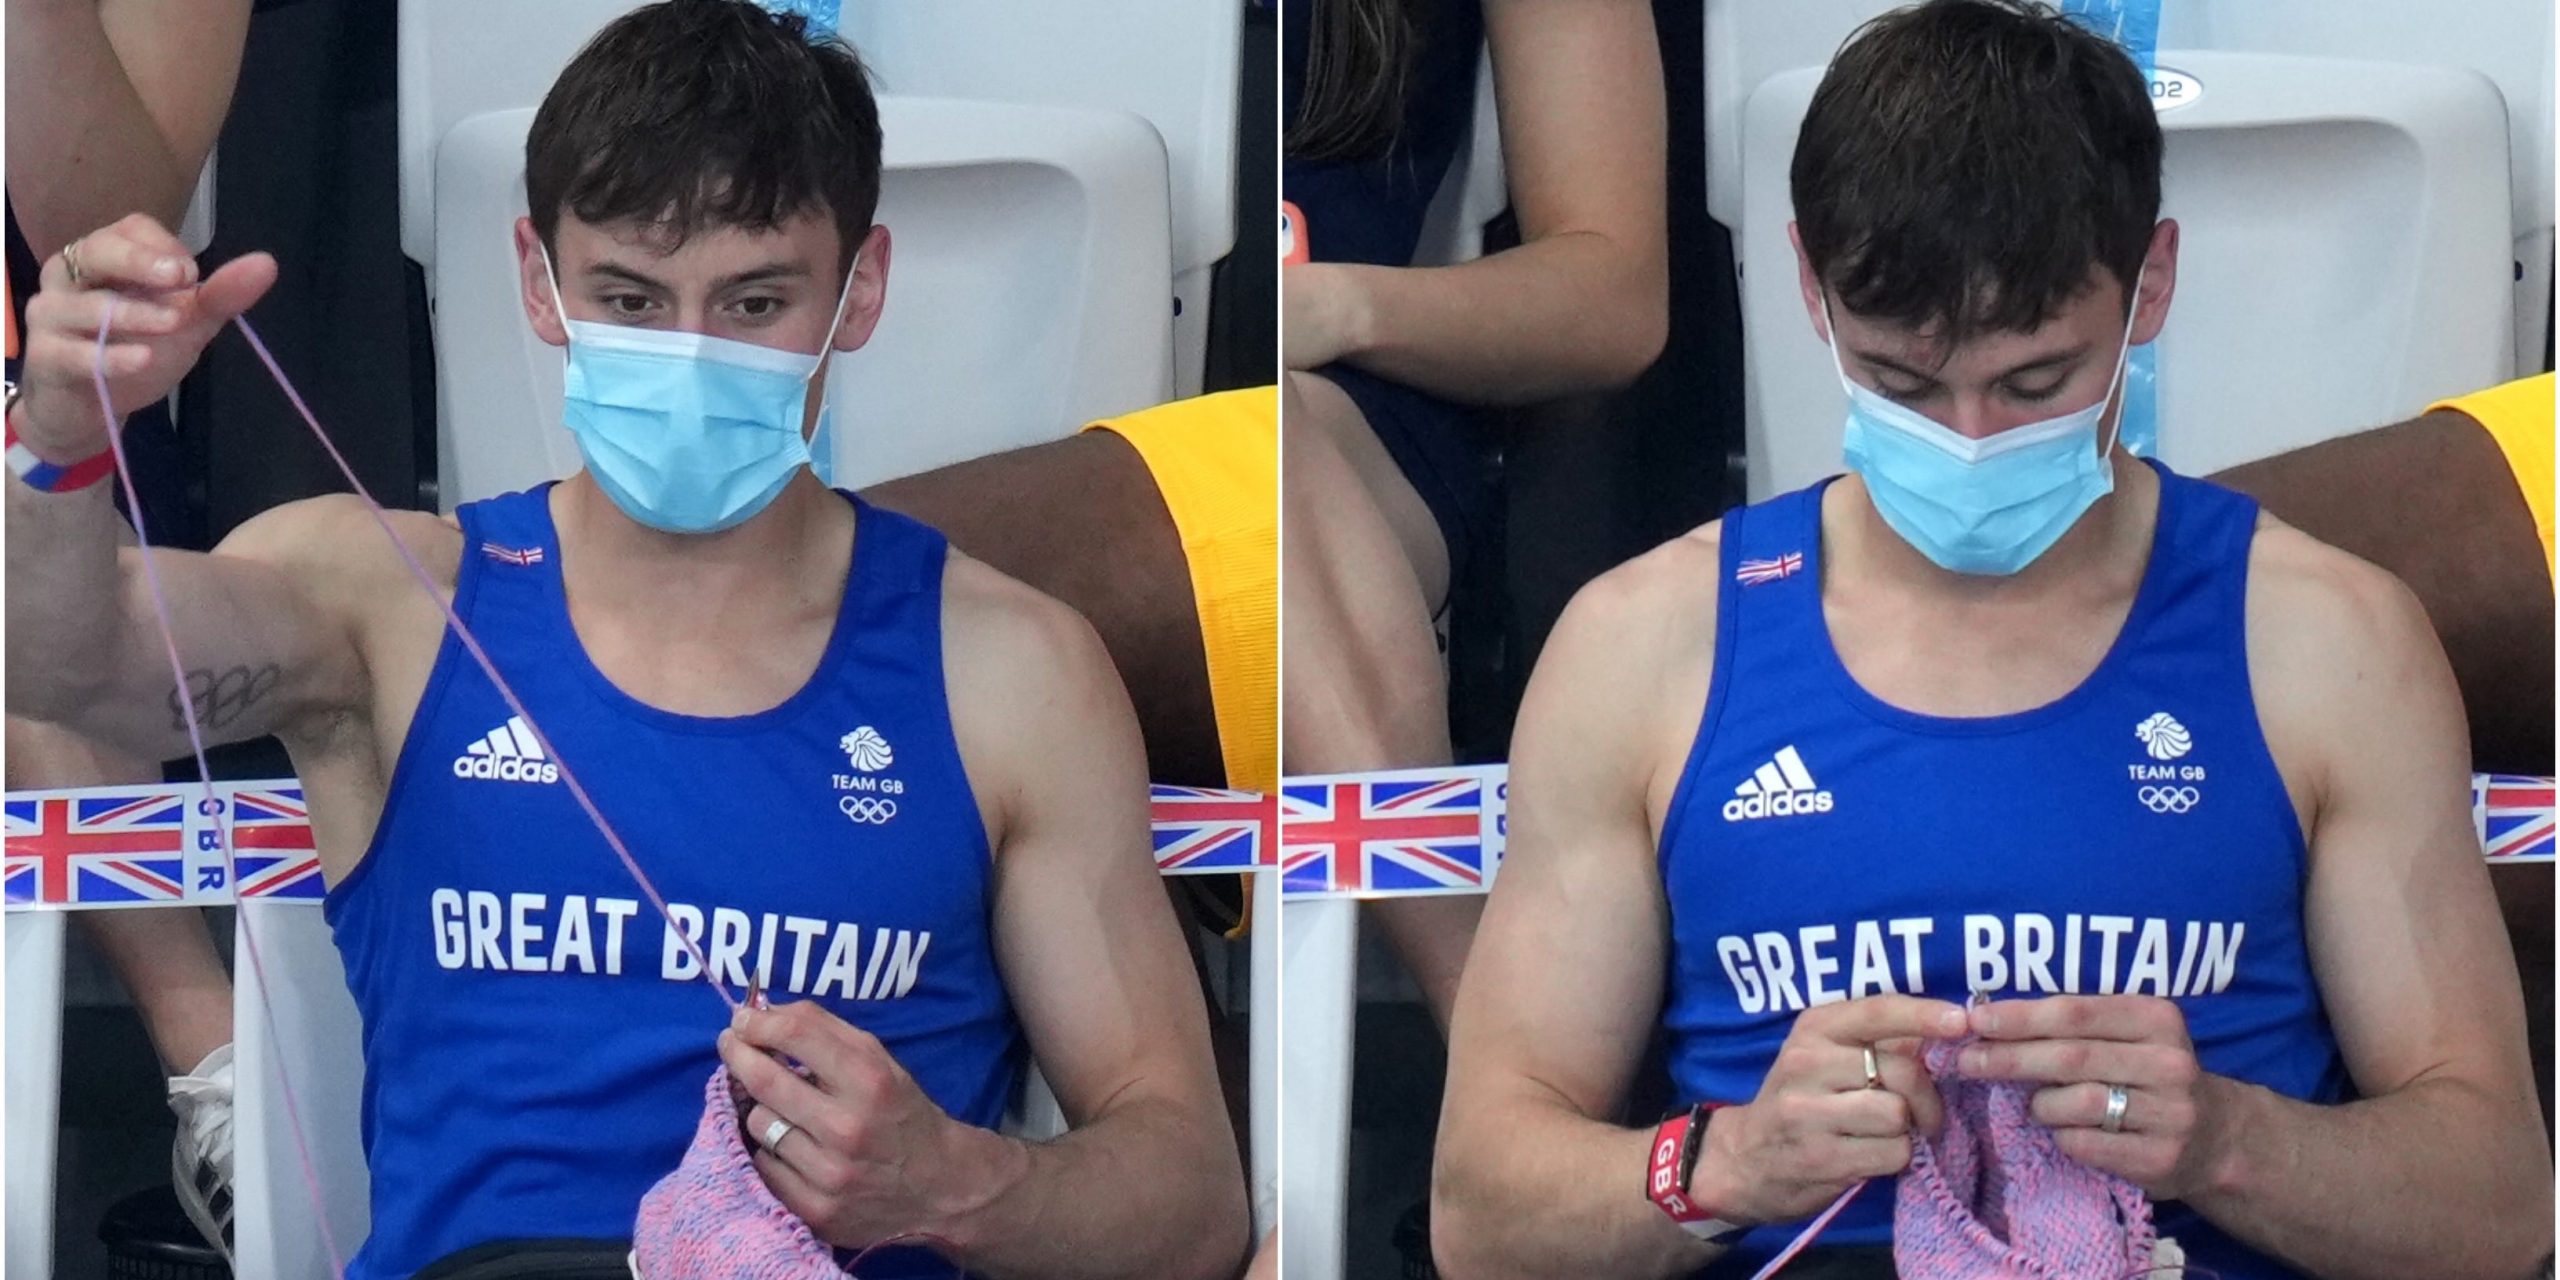 Wide preview of Tom Daley knitting during the women's springboard finals at the Tokyo Olympics.